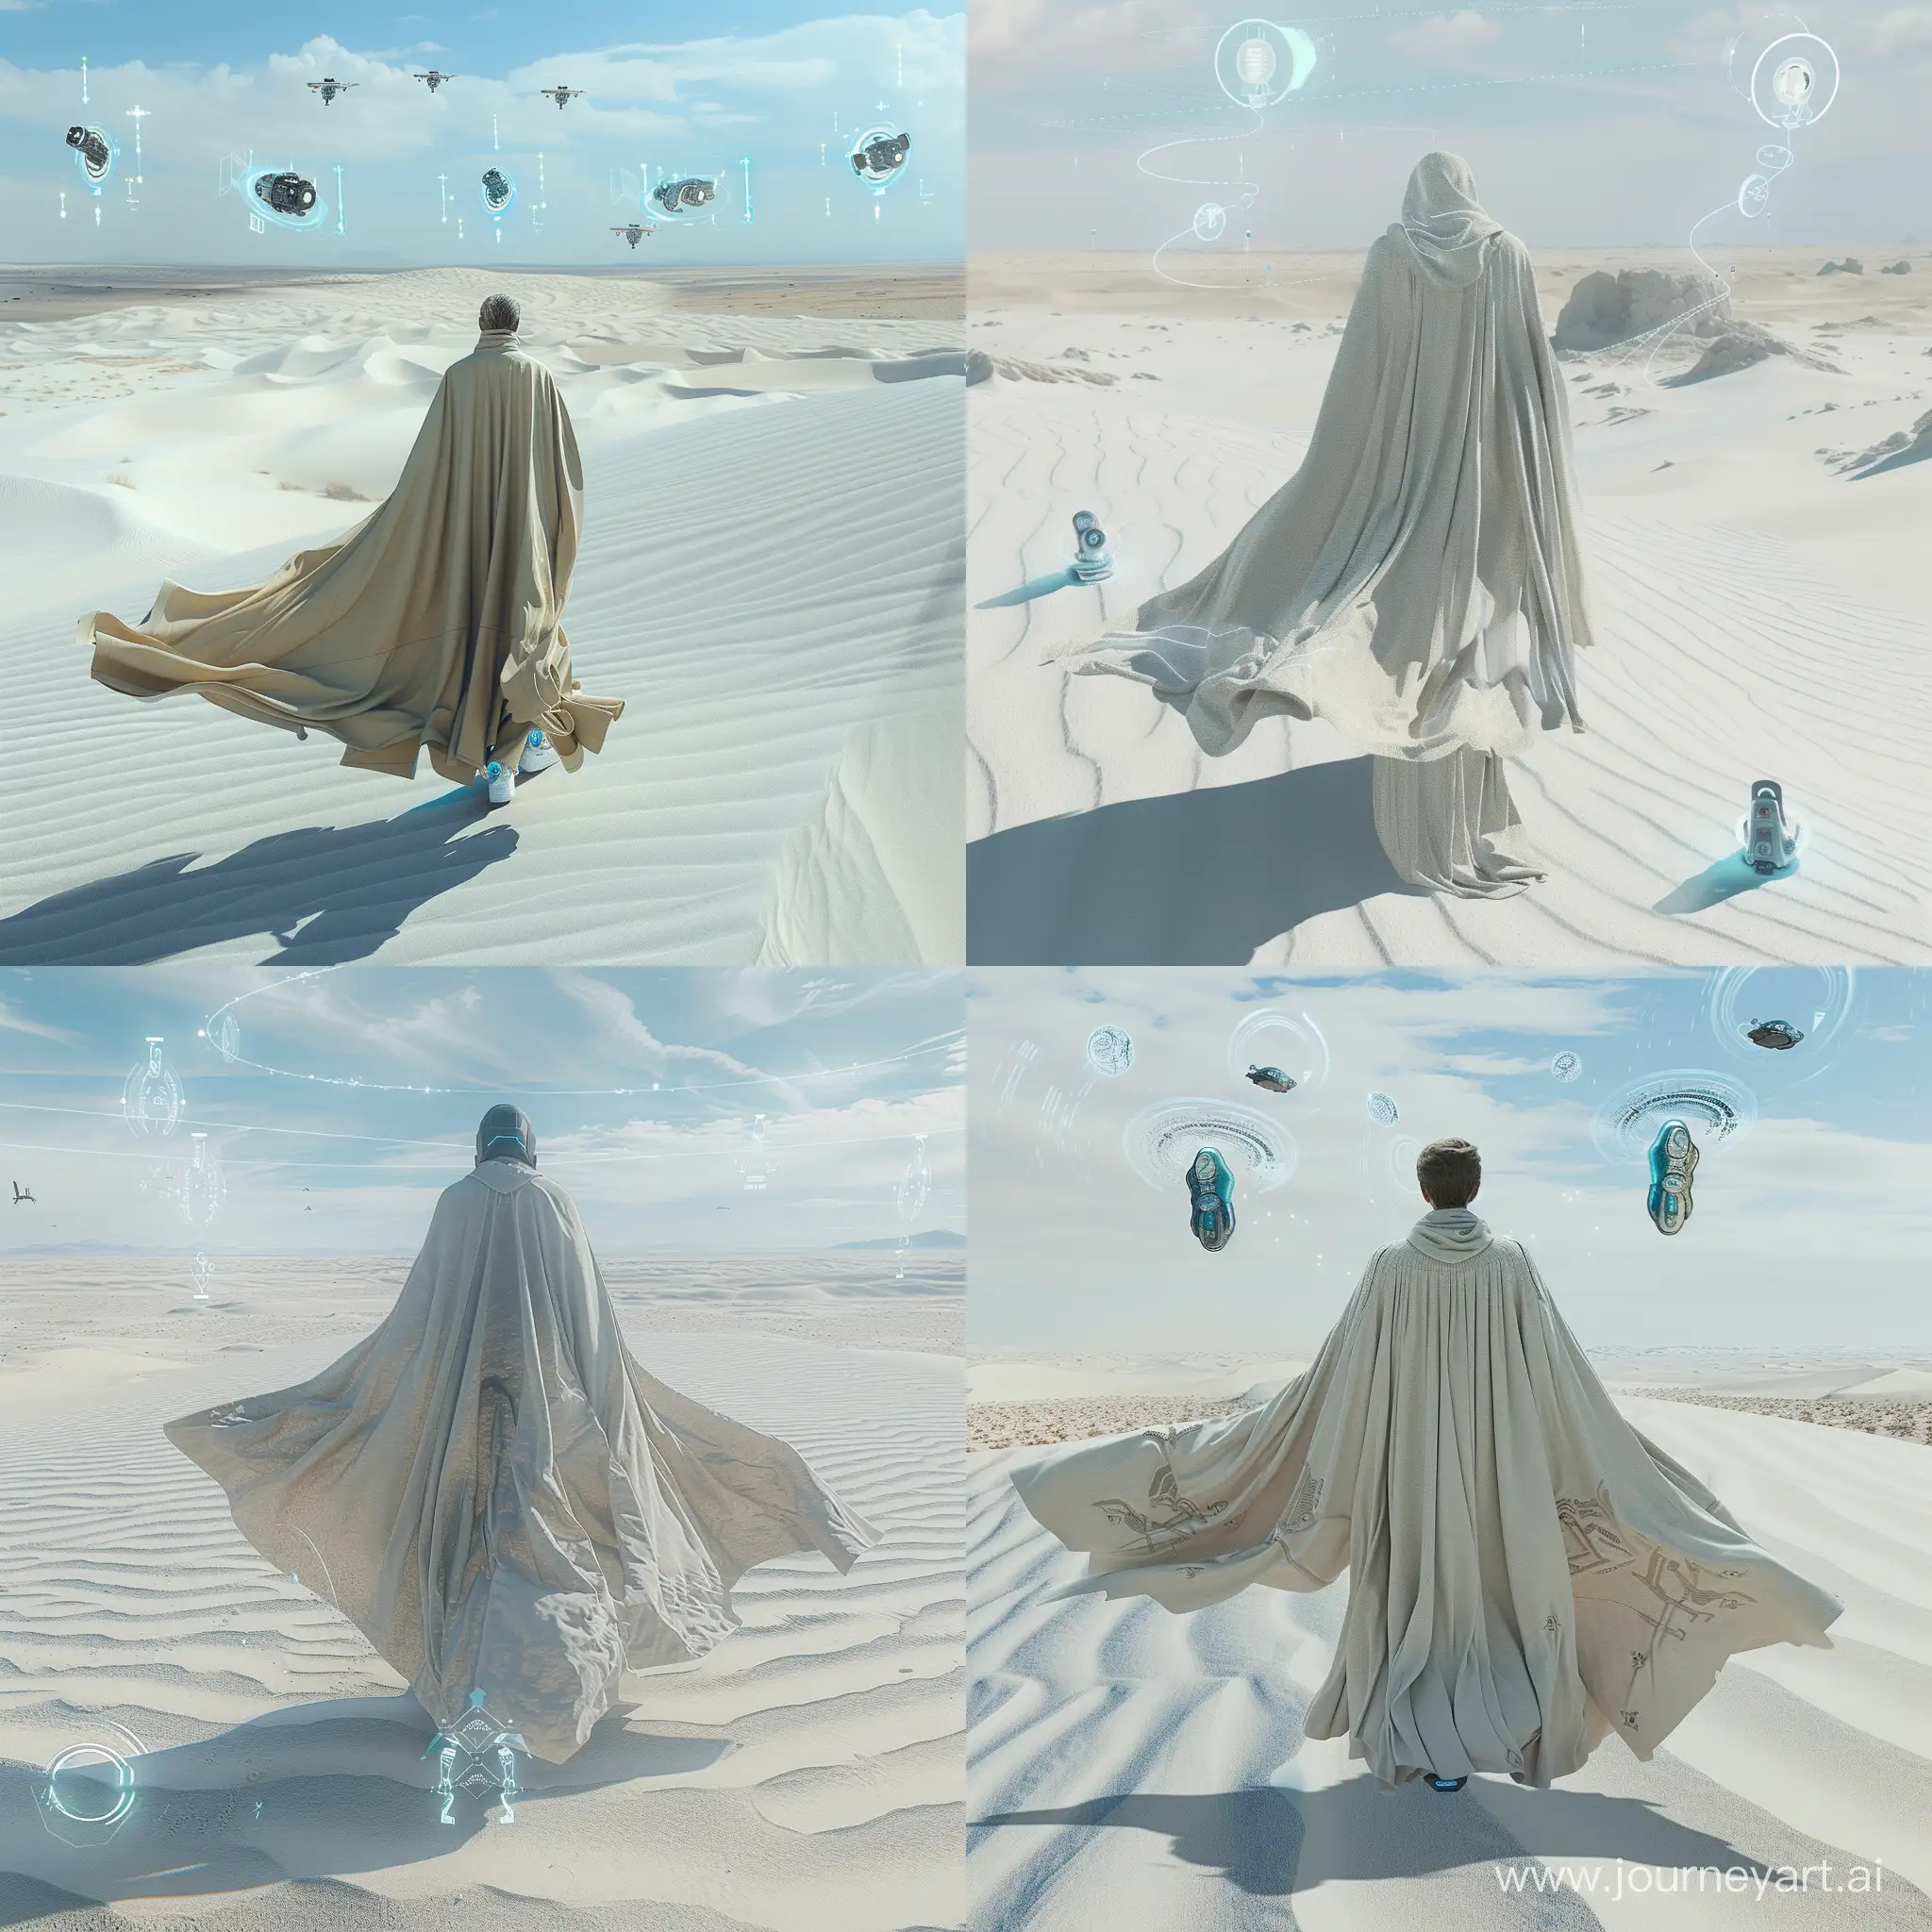 "Describe a vast desert with white sand that stretches without limits, in the middle of which stands a human wearing a long robe that flutters with the desert wind. However, what is different is the advanced technology tucked inside, for example, flying shoes, a cloak that equipped with smart sensors, and holographic devices floating around it. Tell us how this desert became the backdrop for future technological exploration."